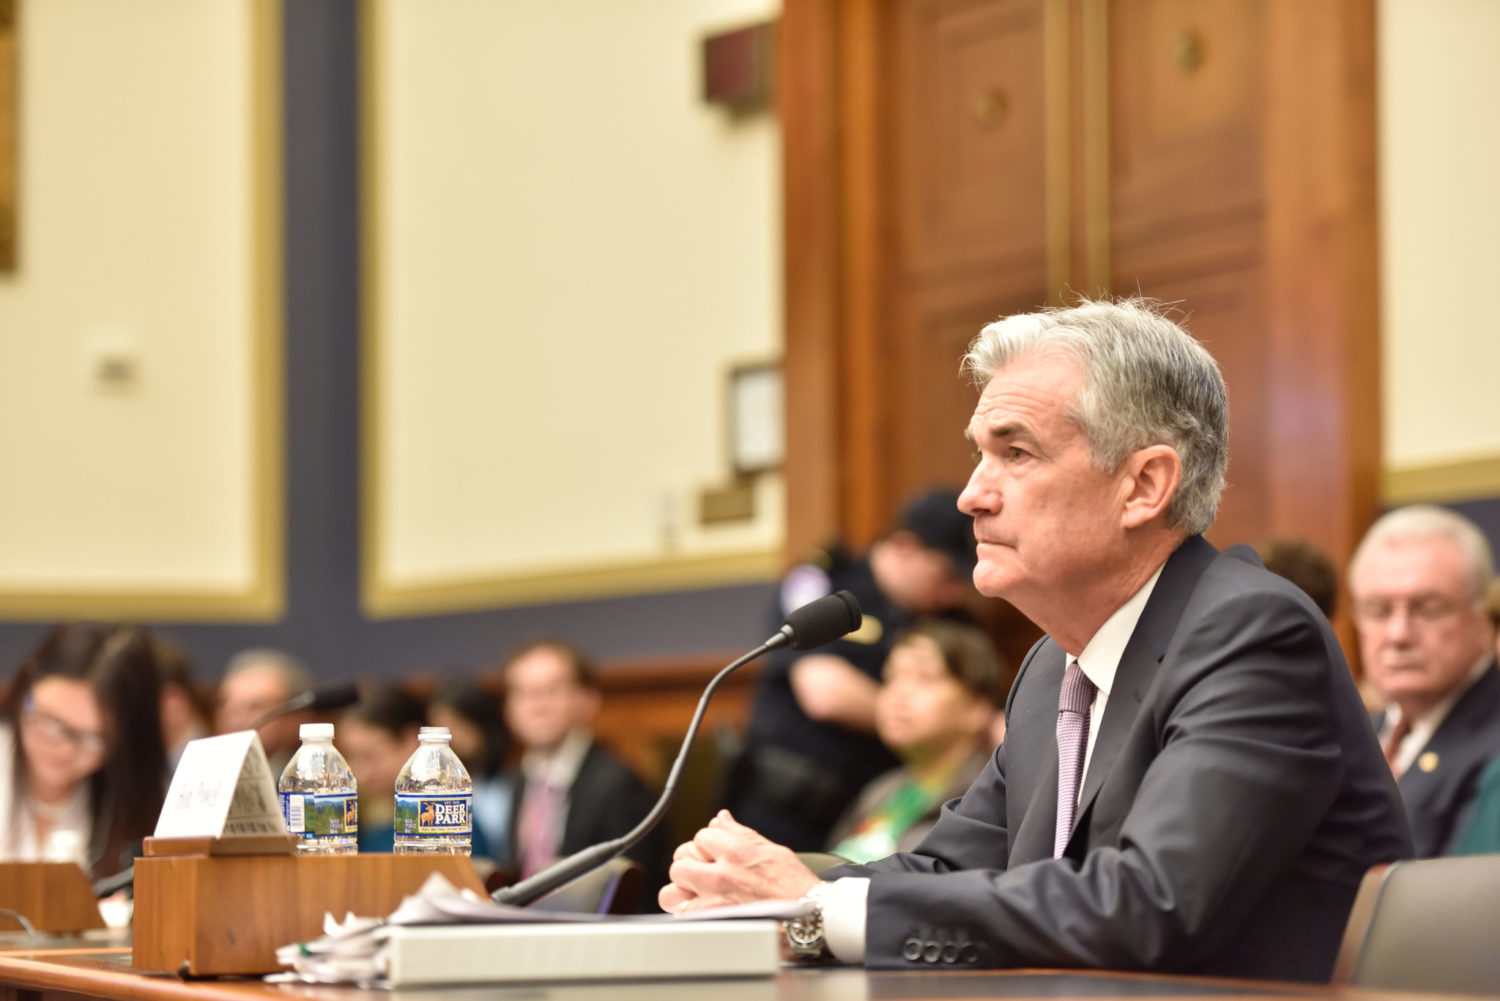 May a Digital Greenback Compete on Privateness? Fed Chairman Powell Hints It May